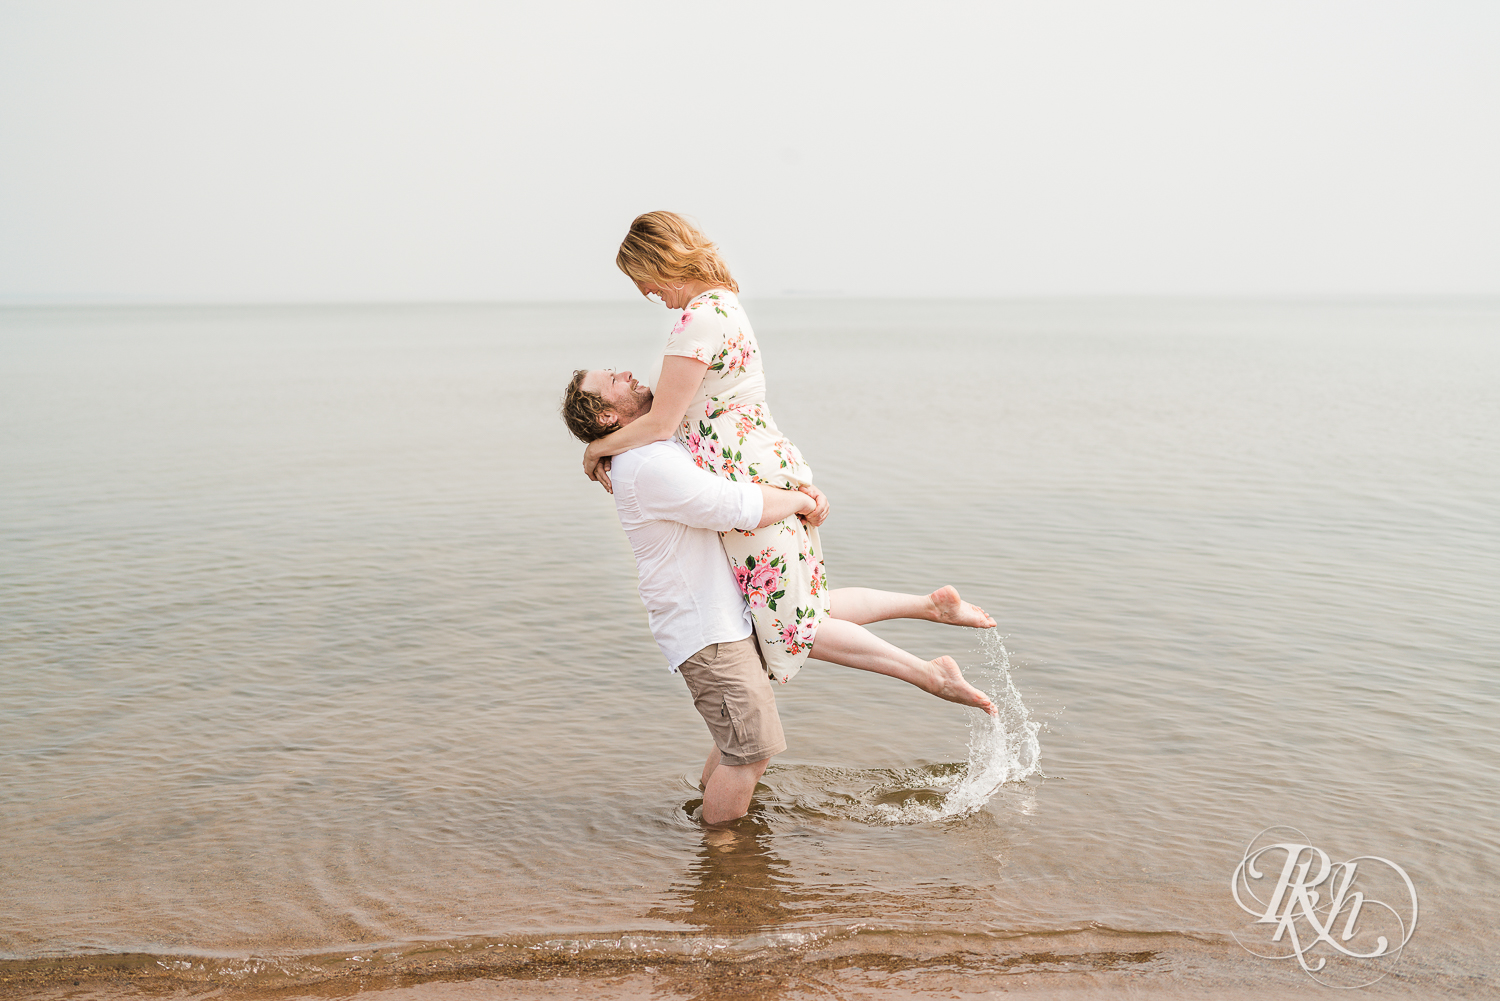 Man lifts woman in Lake Superior on Park Point Beach in Duluth, Minnesota.